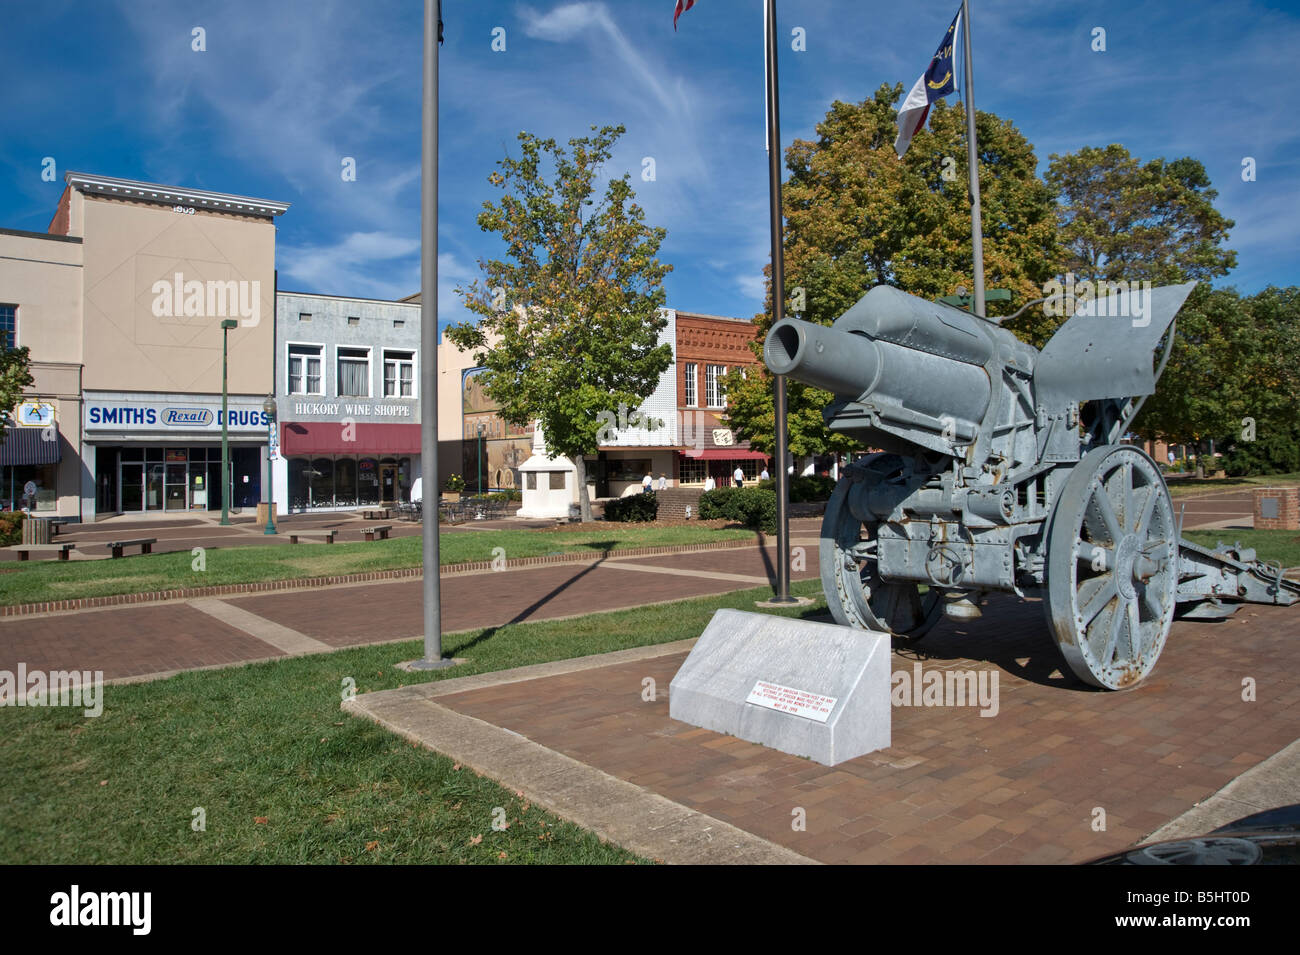 First World War German Howitzer surrendered to US troops in 1918 used as War Memorial, Hickory, North Carolina, USA Stock Photo